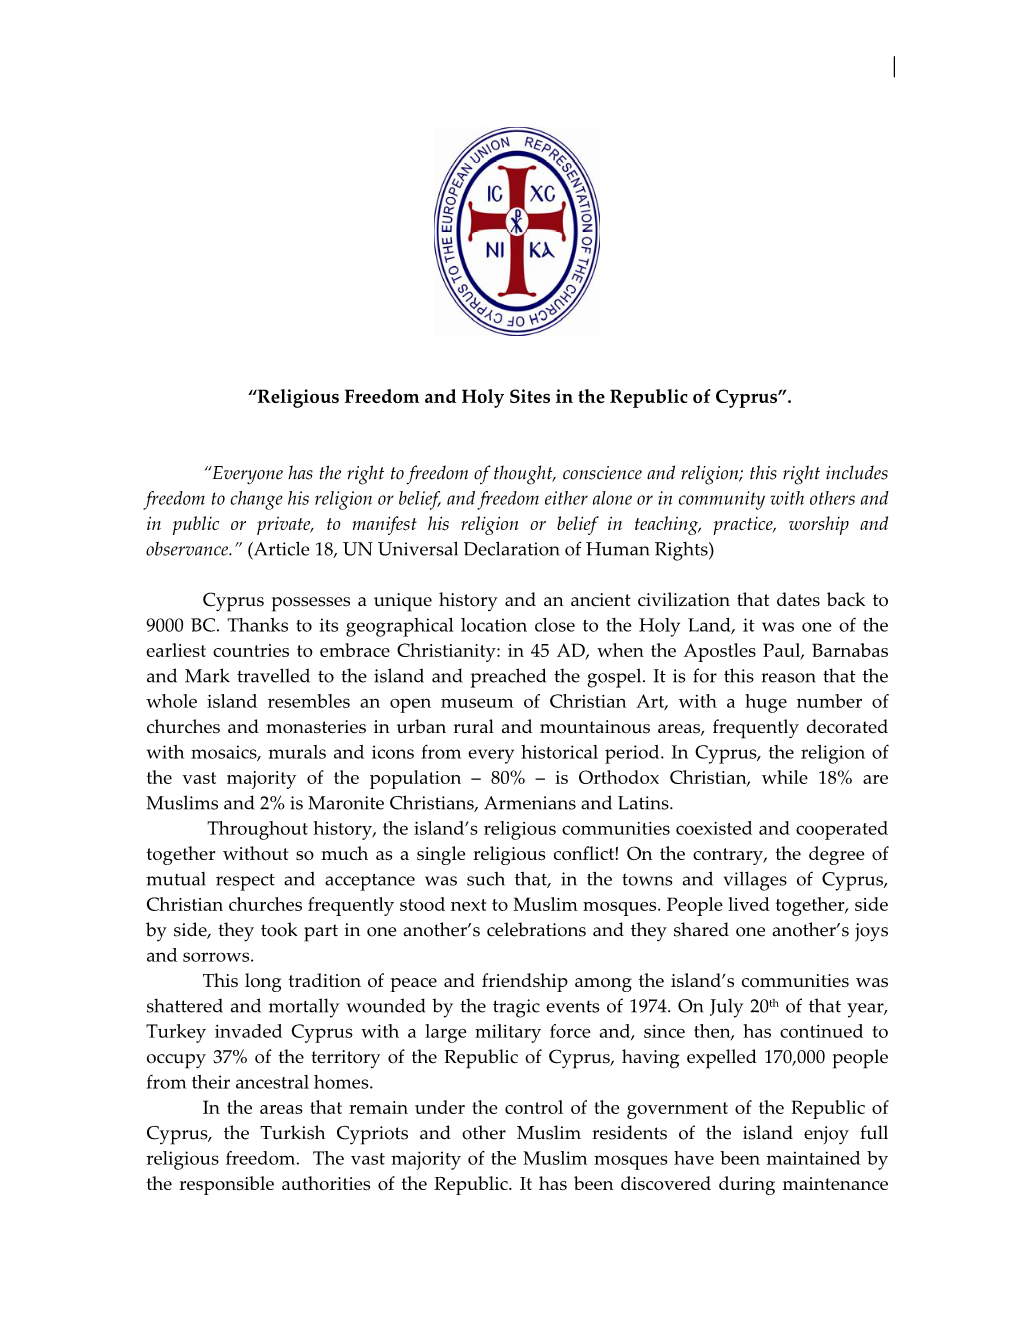 “Religious Freedom and Holy Sites in the Republic of Cyprus”